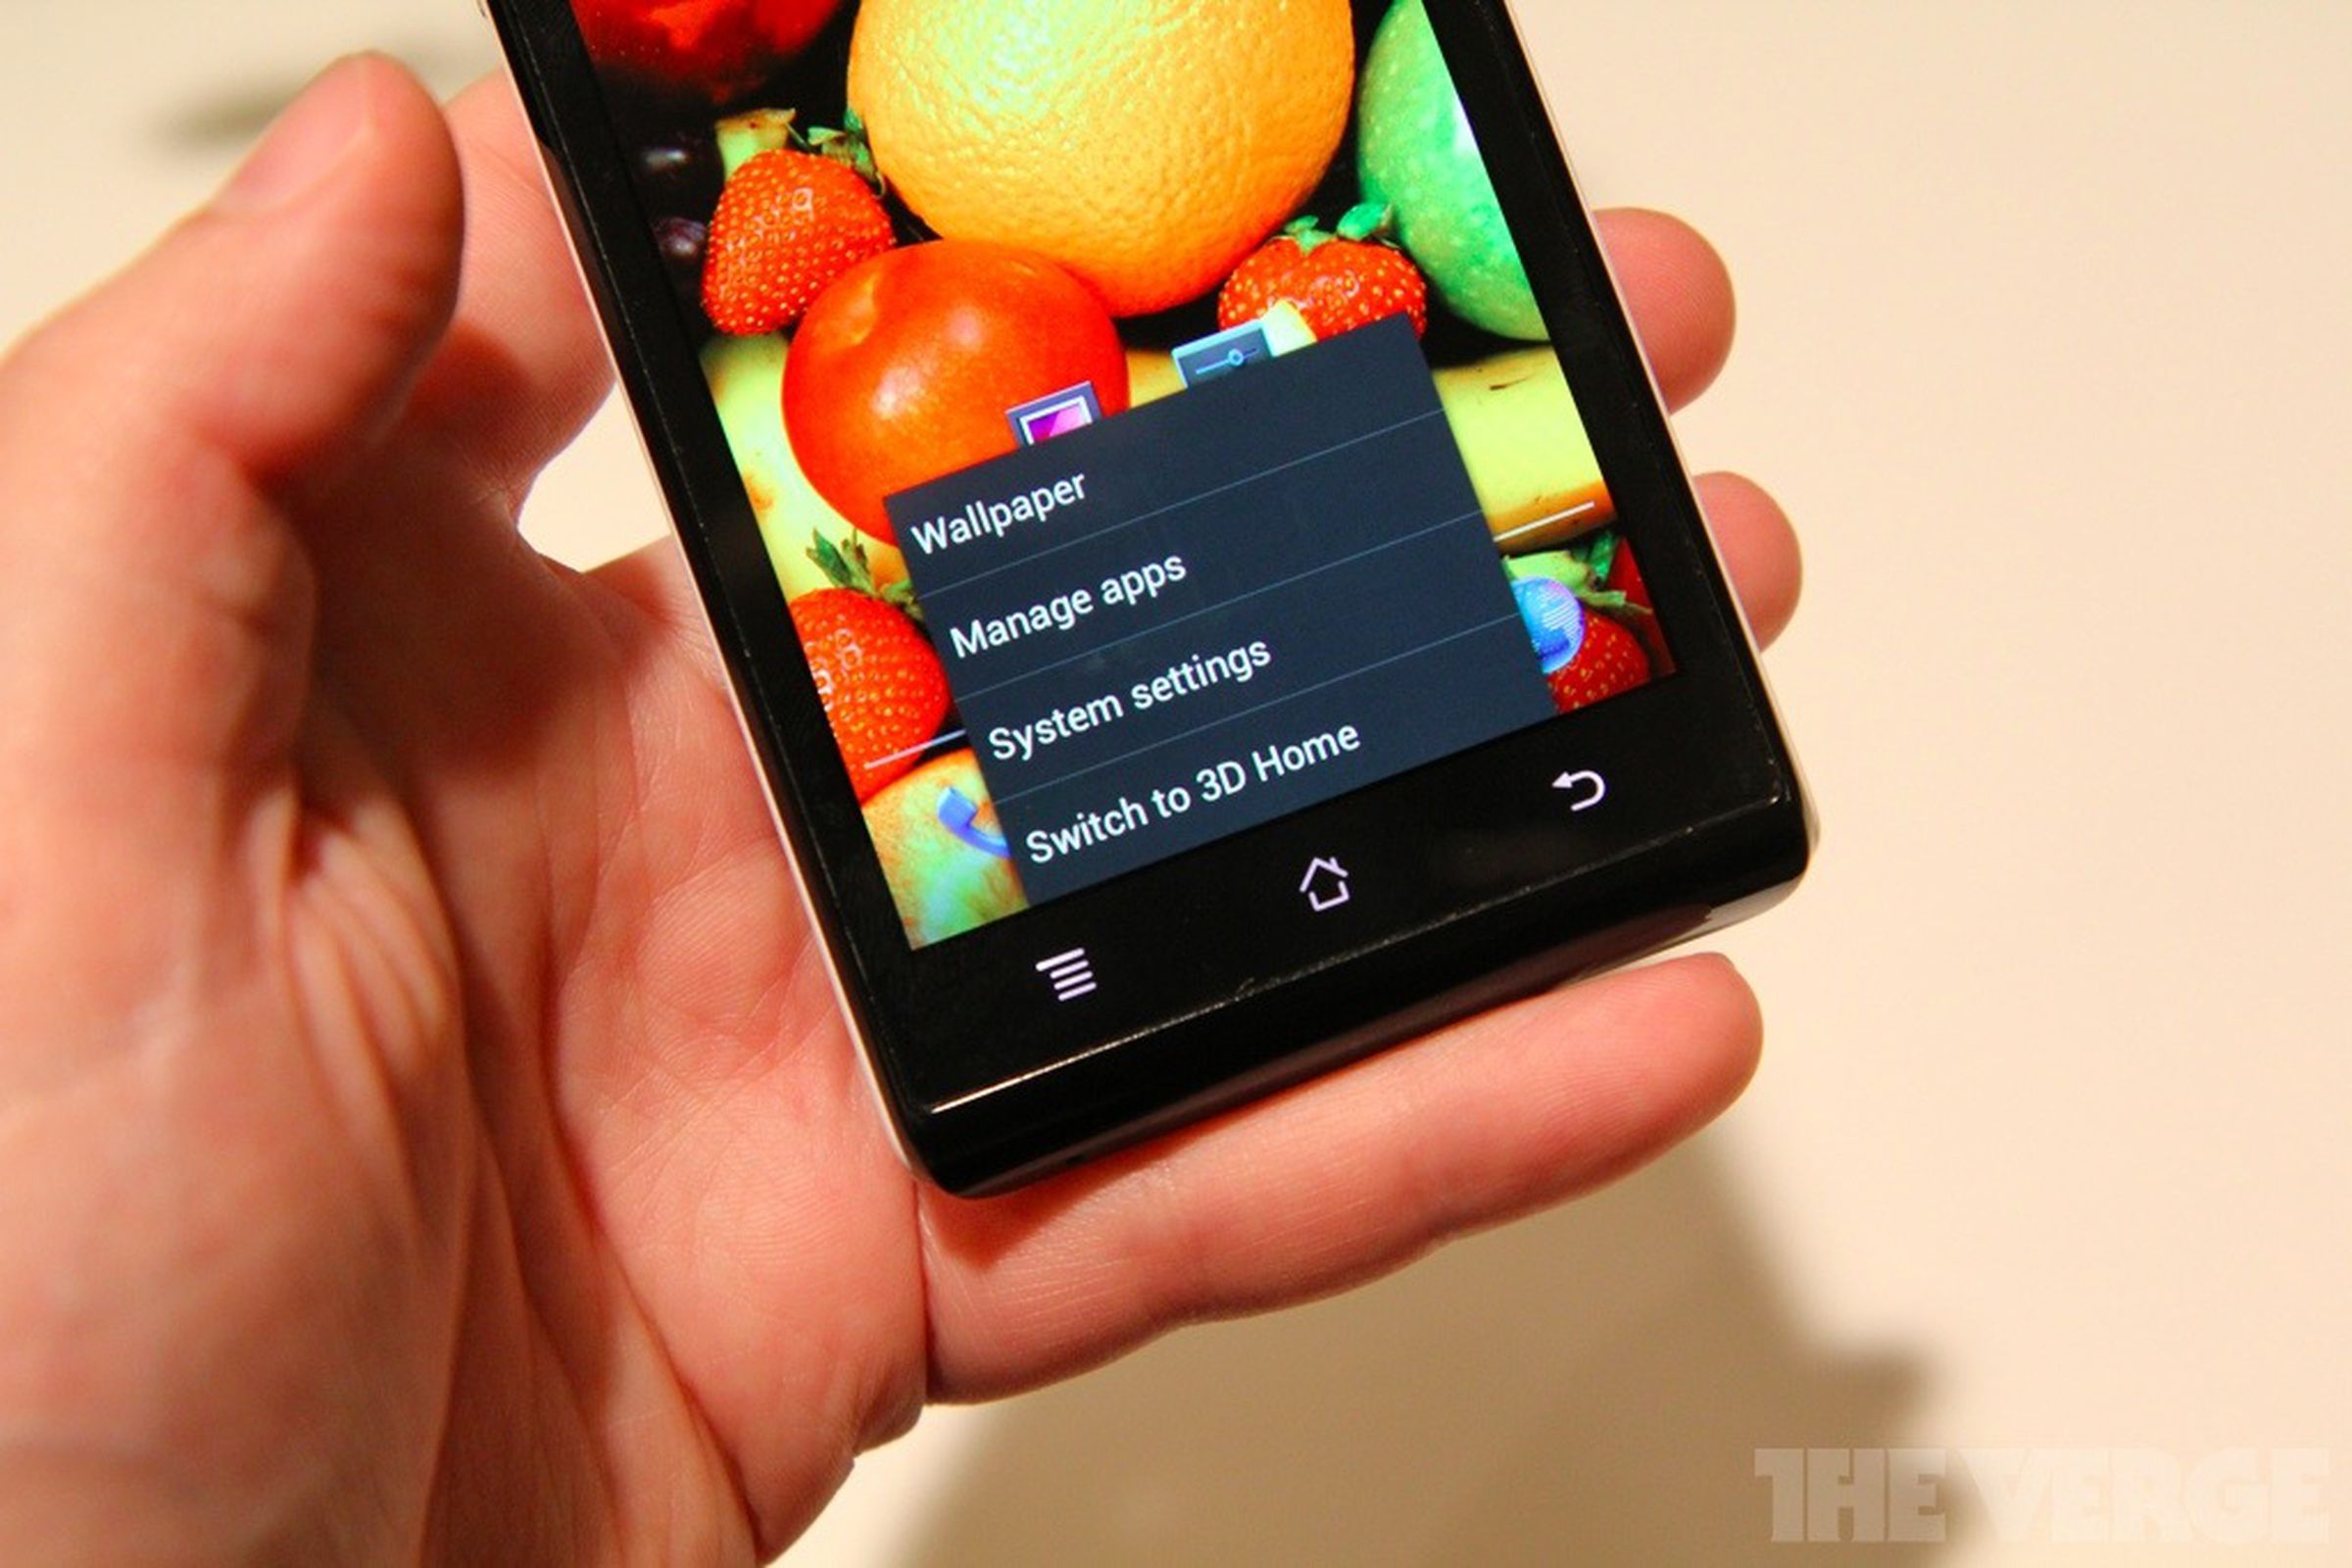 Gallery Photo: Huawei Ascend P1 / P1S hands-on pictures